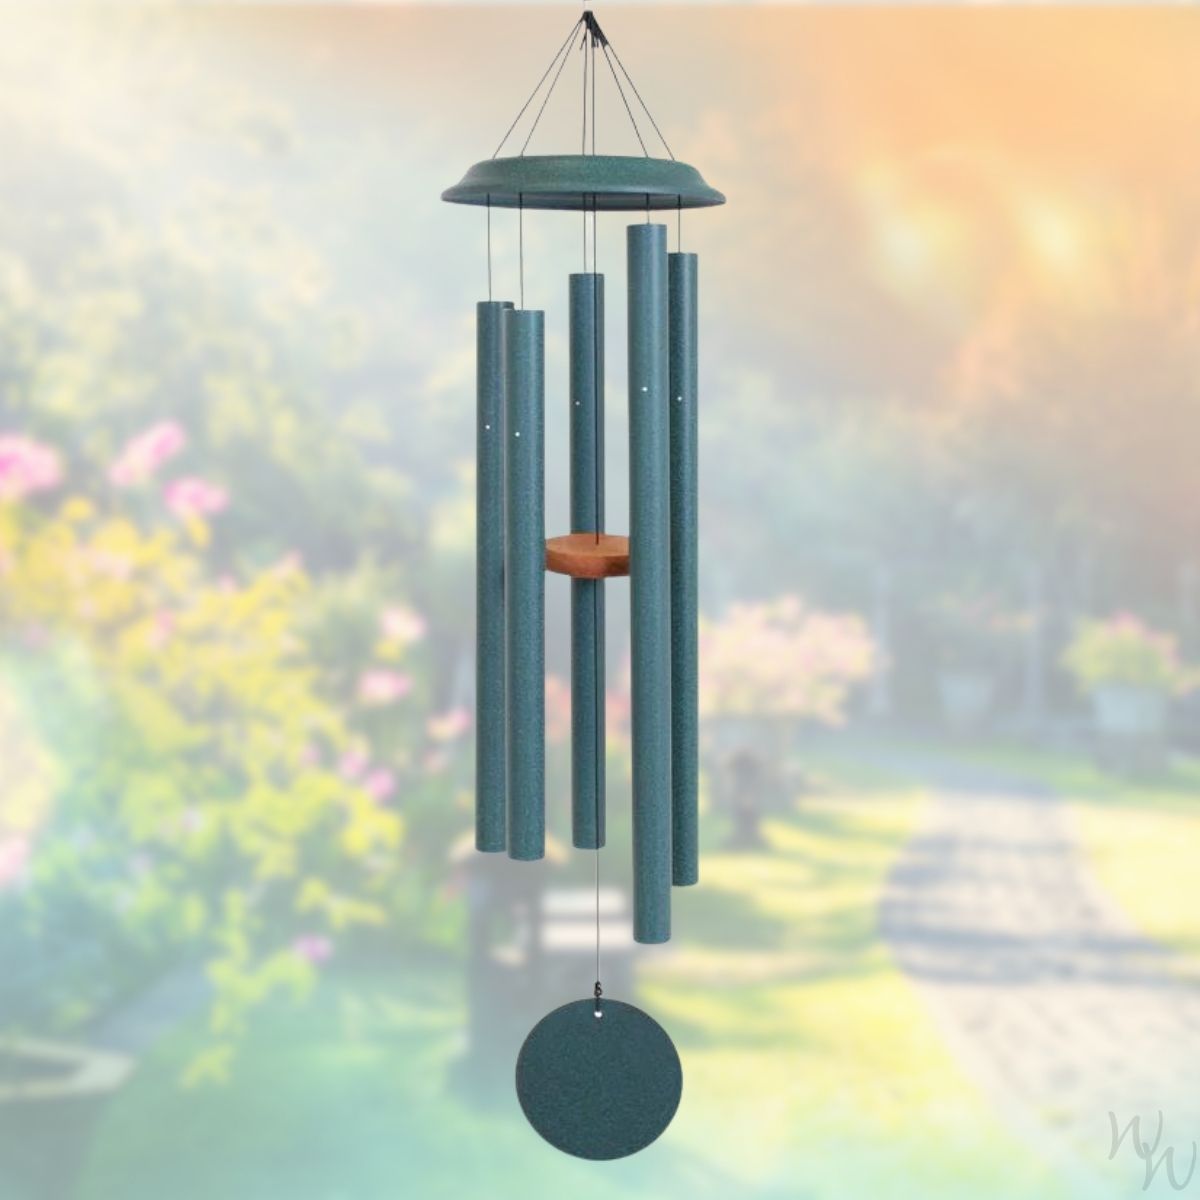 Shenandoah Melodies 47 Inch Green Wind Chime - Scale Of B